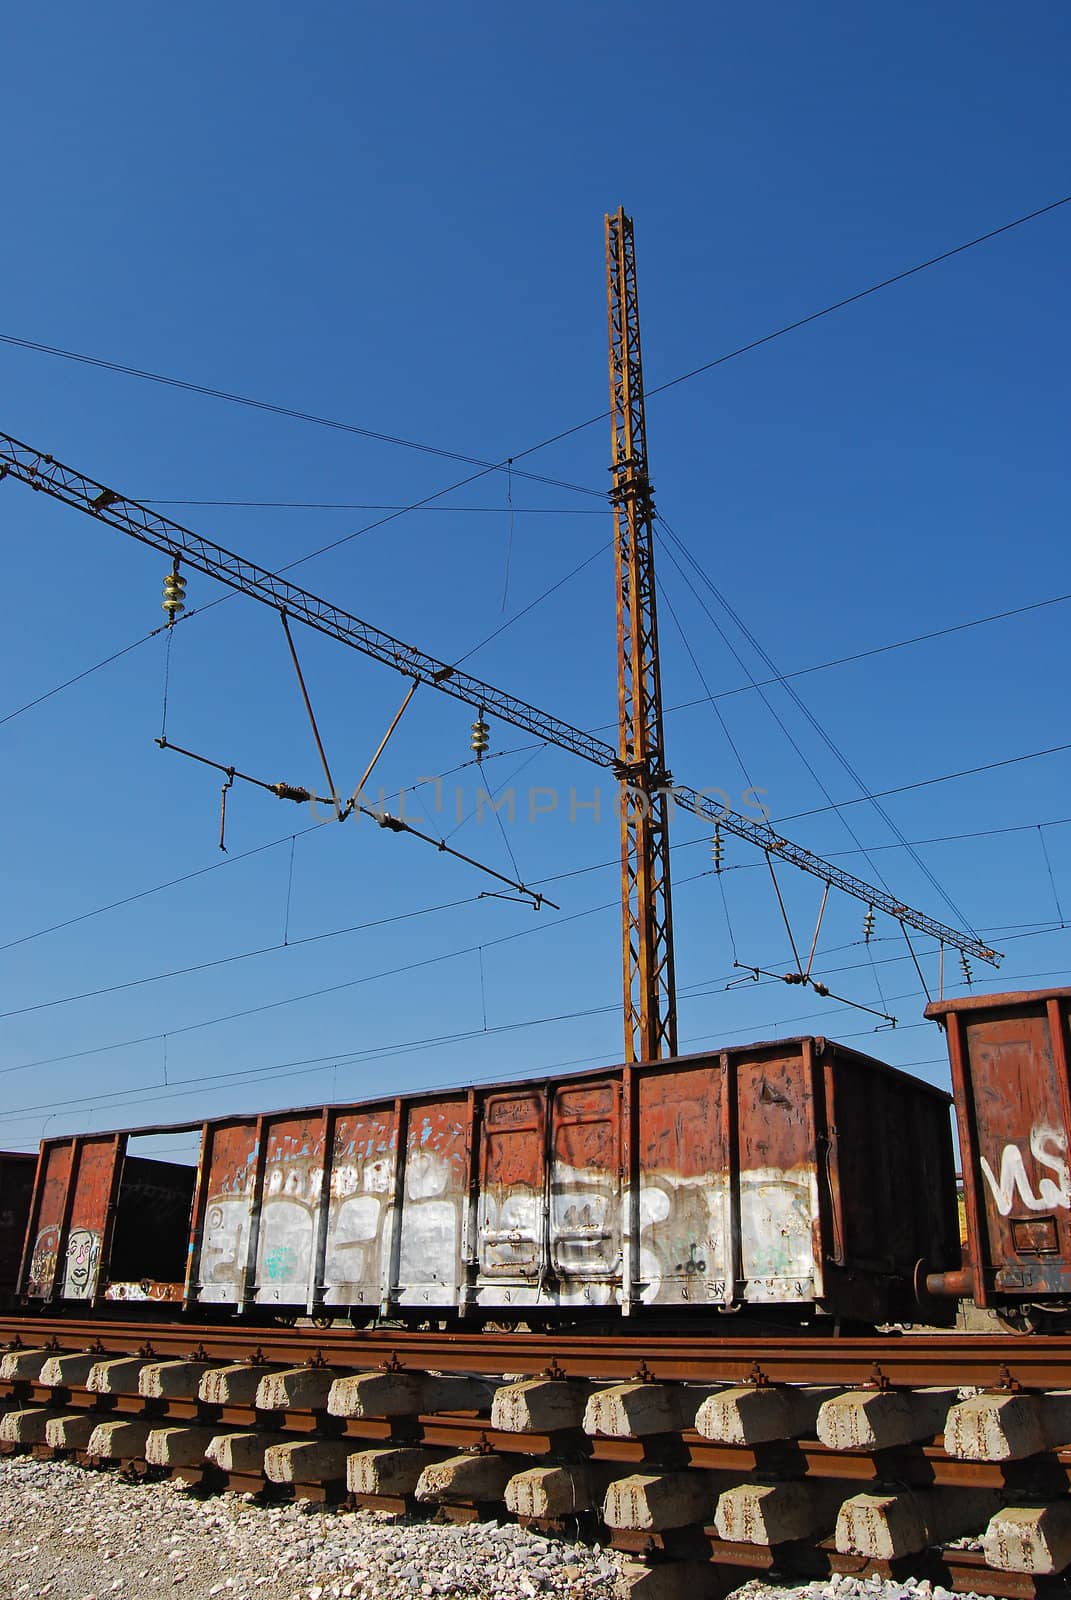 Grungy goods wagons, railways, sleepers, electrical supply